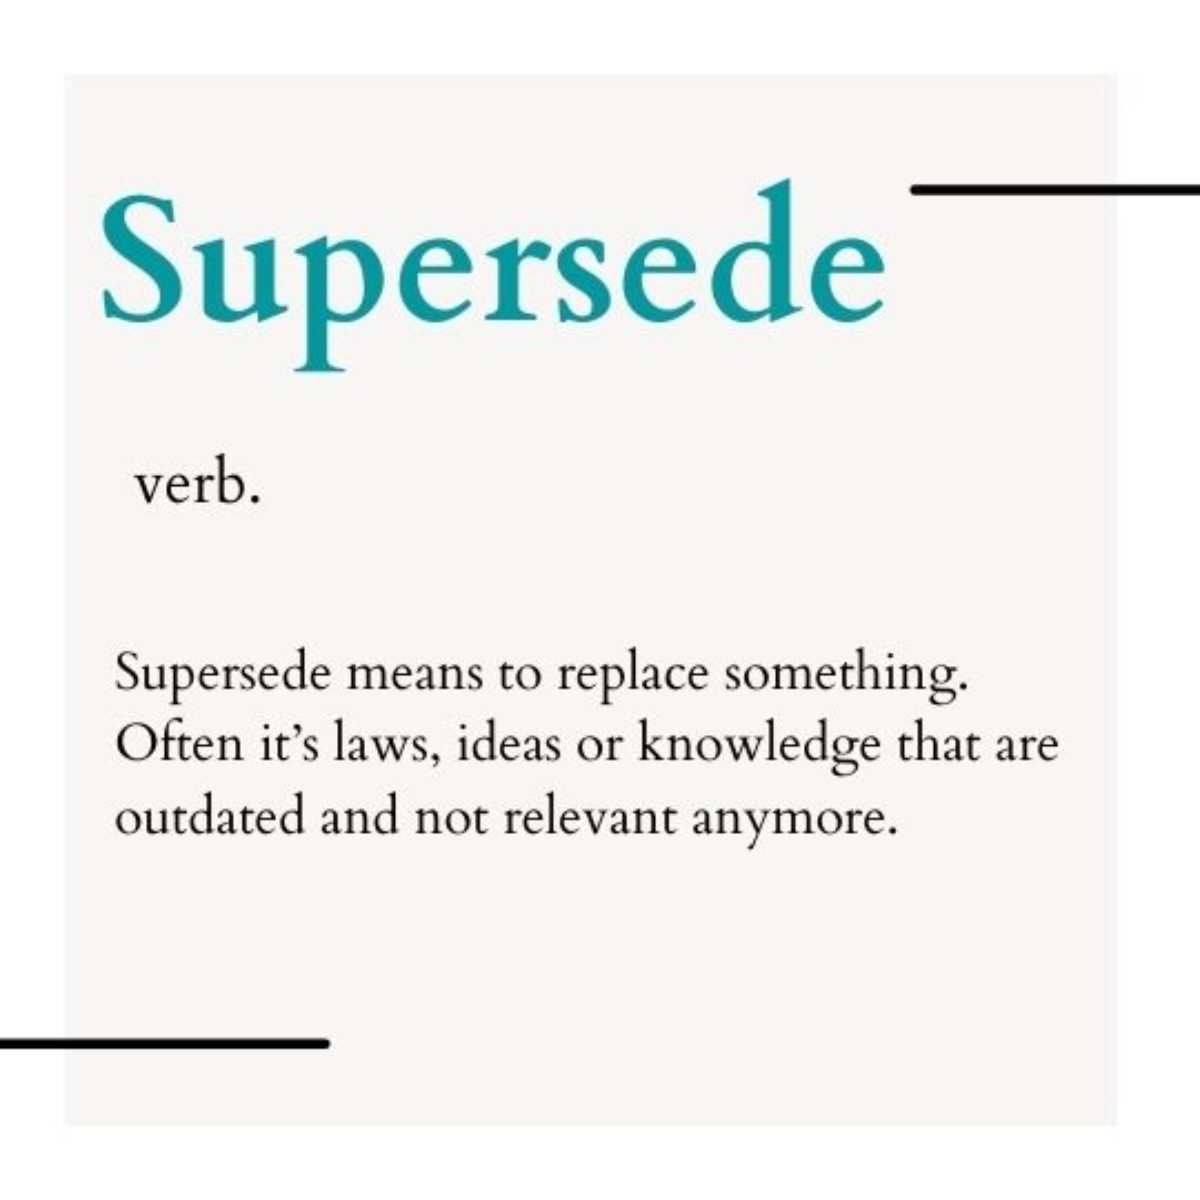 Supersede: Definition and Example Sentences